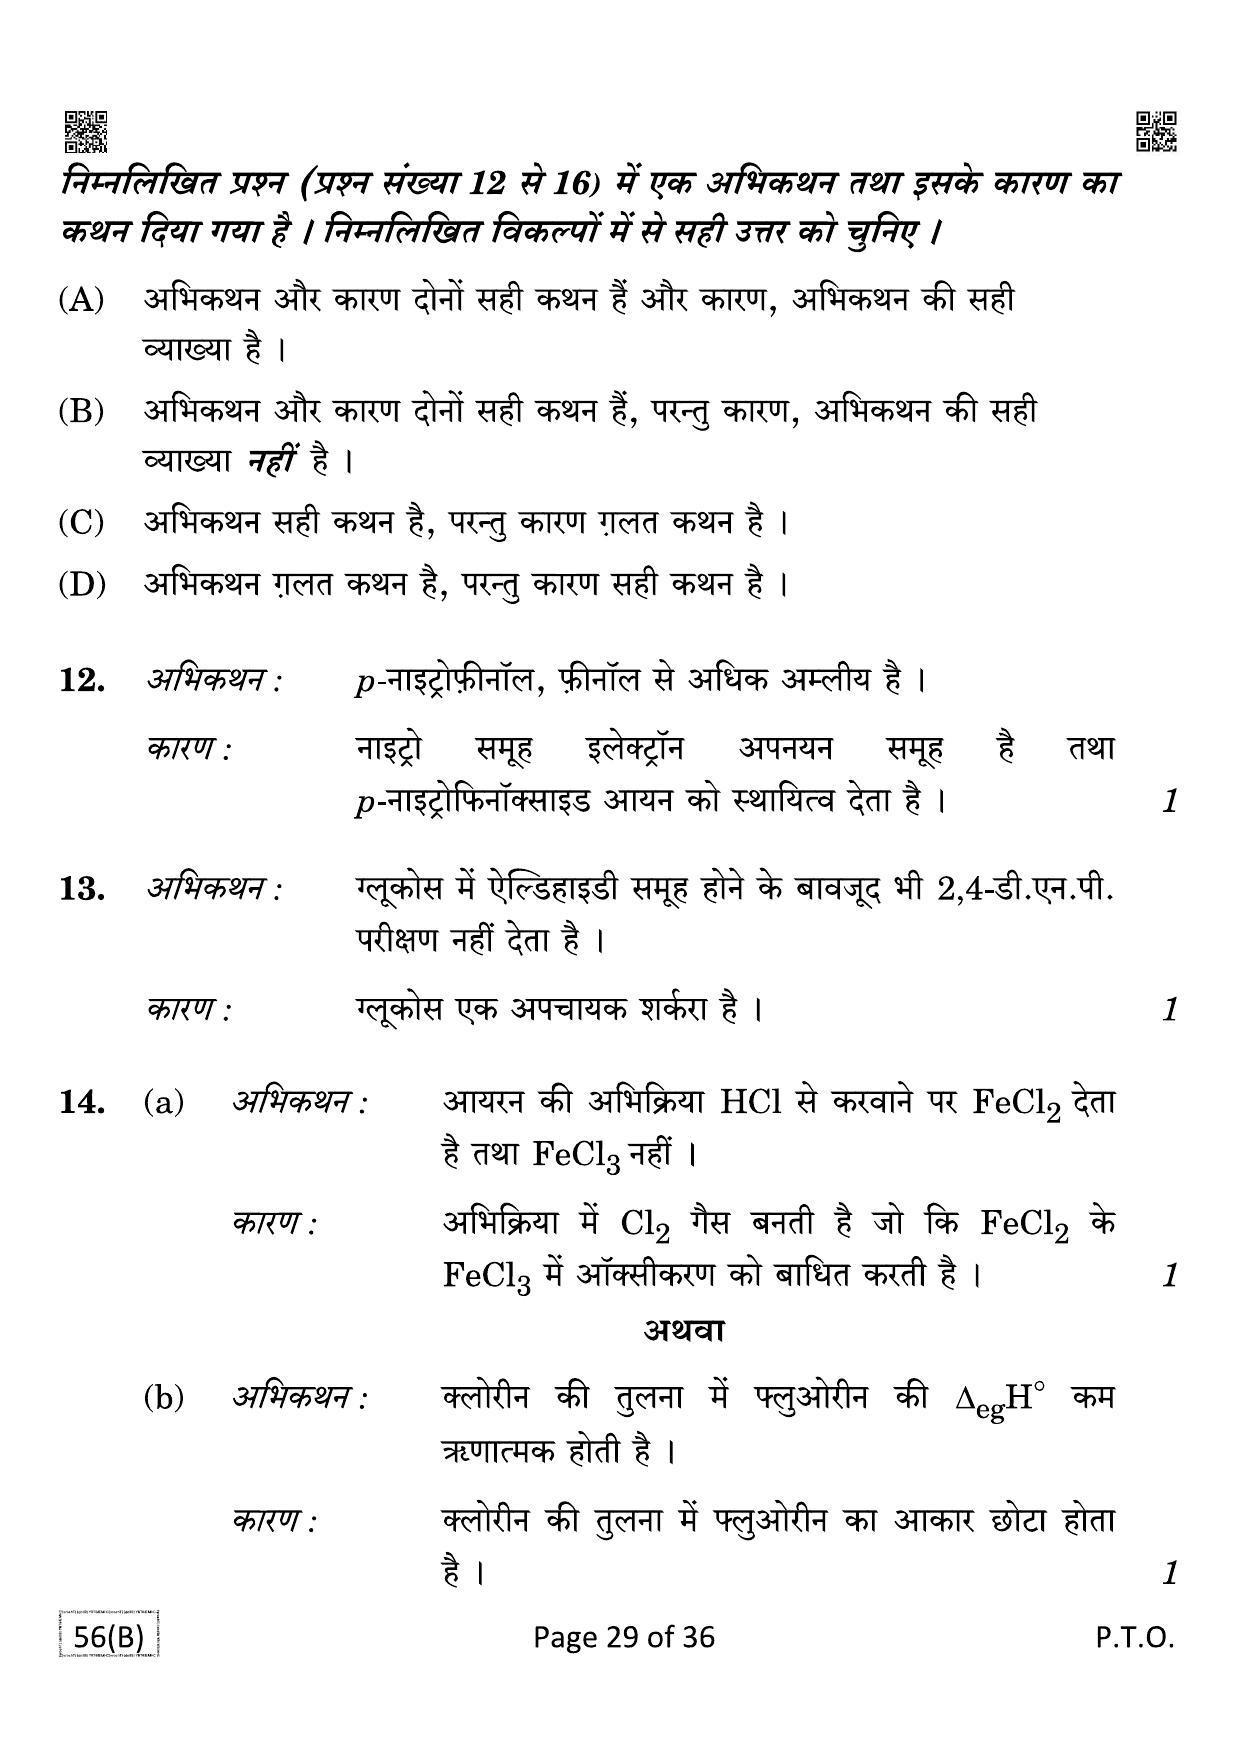 CBSE Class 12 QP_043_CHEMISTRY_FOR_BLIND_CANDIDATES 2021 Compartment Question Paper - Page 29